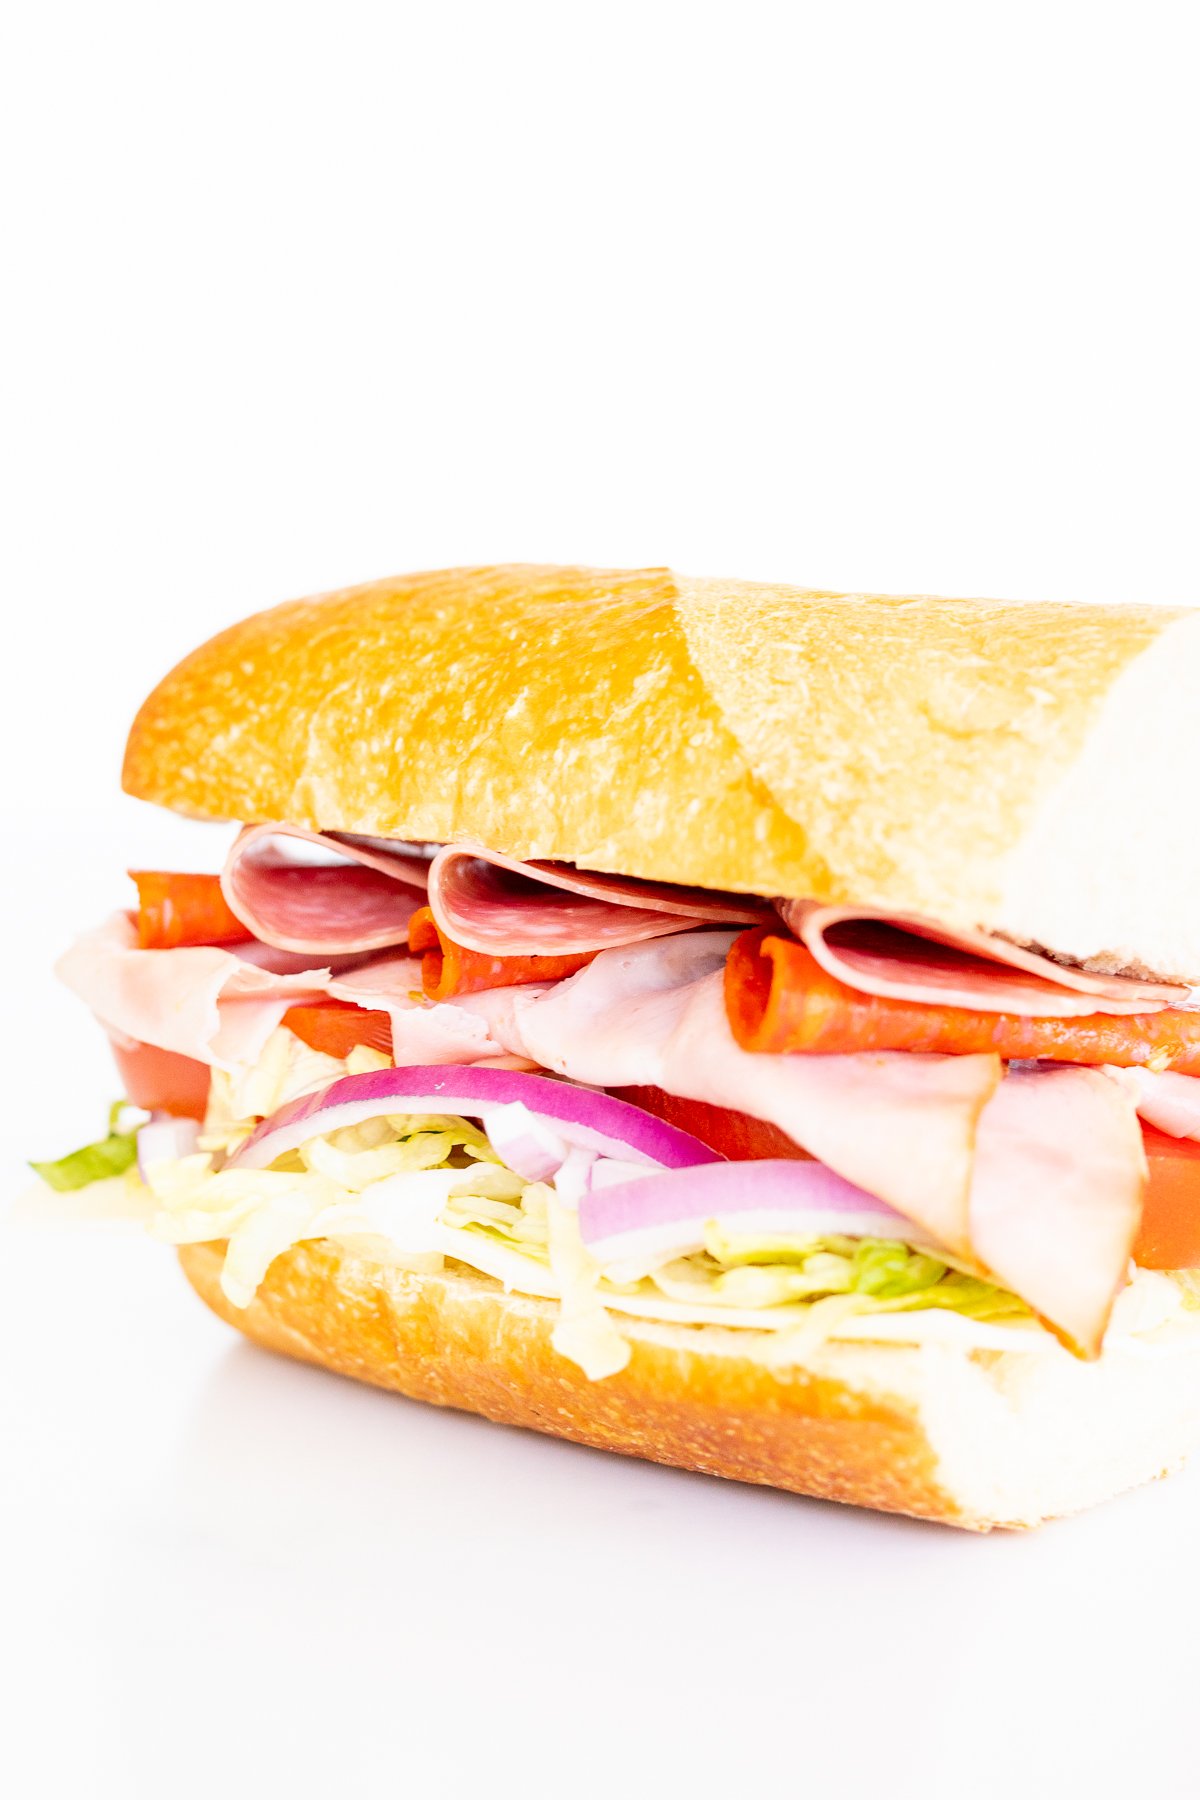 A sandwich with ham, lettuce, tomatoes, and onions.